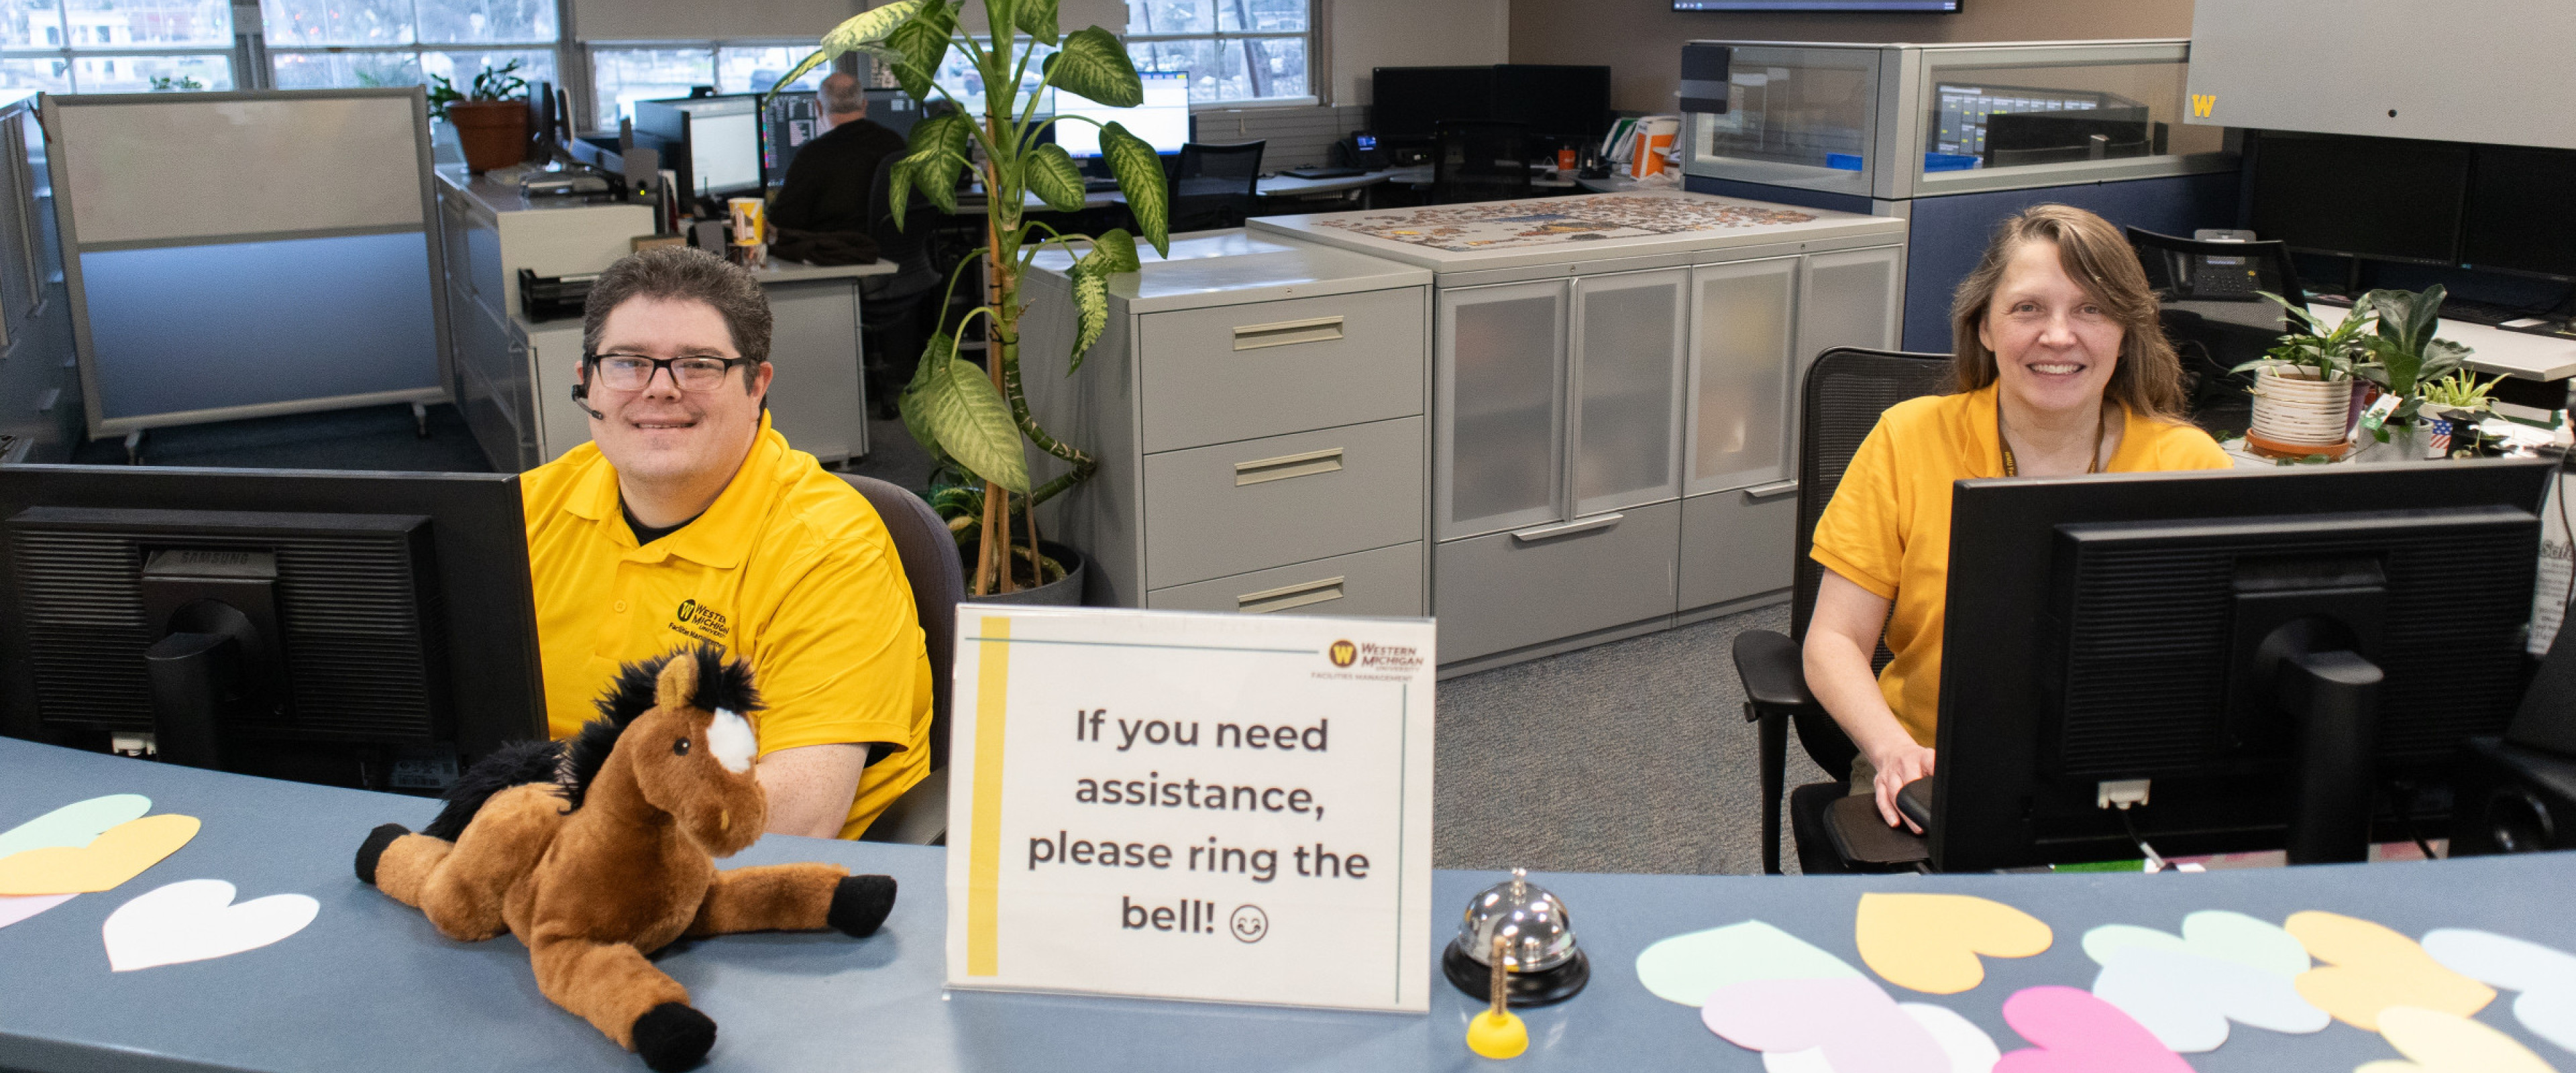 Two service center employees sit behind a curved blue counter that has a sign on it saying "If you need assistance, please ring the bell!" The counter also has a stuffed horse, bell and mini-plunger on it next to the sign. The two employees are wearing yellow shirts. There are cabinets, plants and other computers in the background.